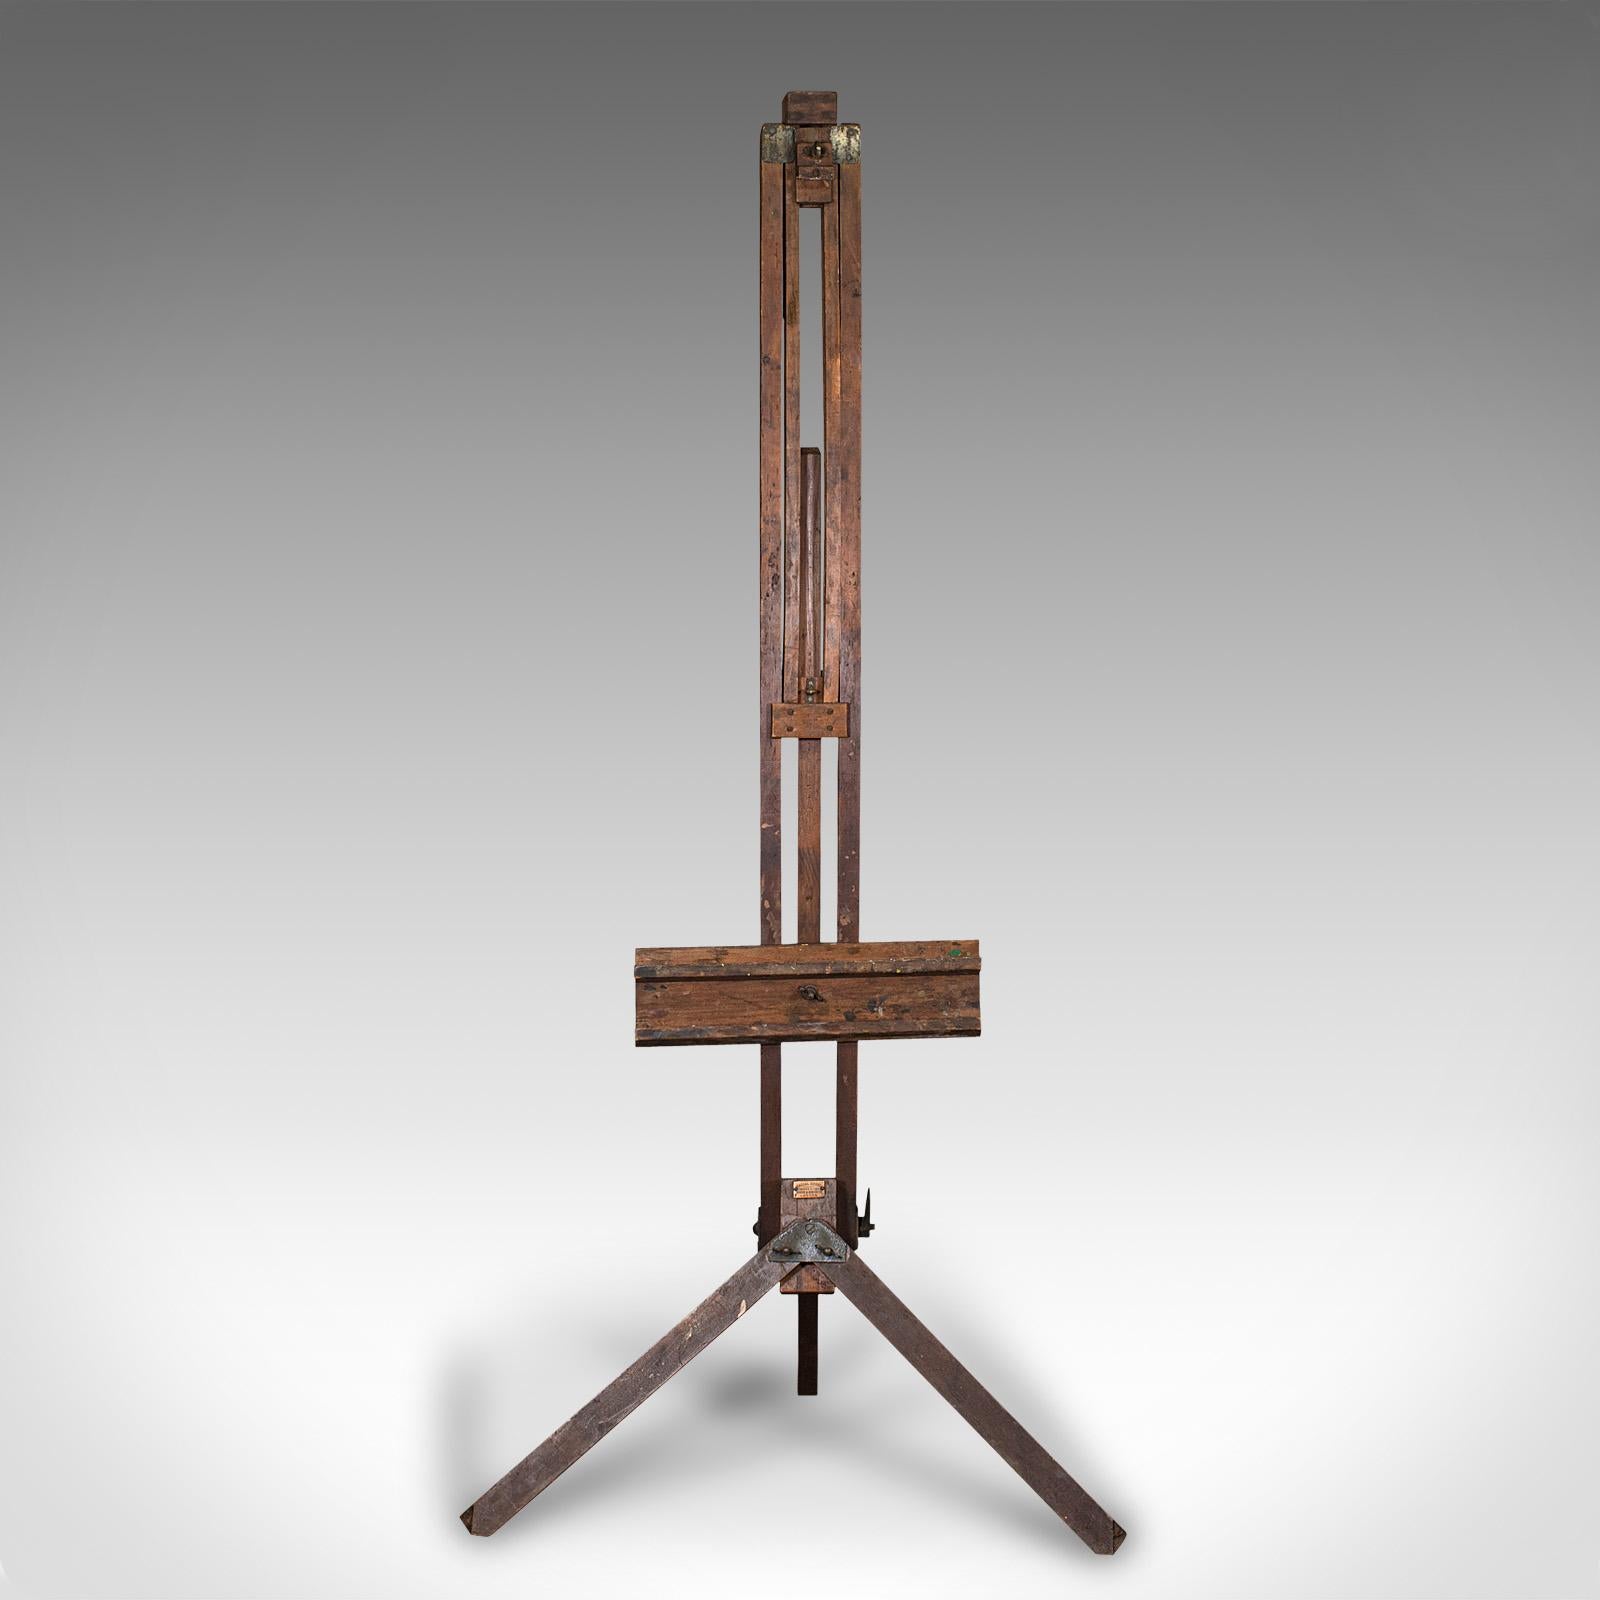 This is a very large antique adjustable easel. An English, pitch pine artist's rest, dating to the late Victorian period, circa 1900.

Offers superior versatility for the larger masterpiece or smaller composition
Displays a desirable aged patina